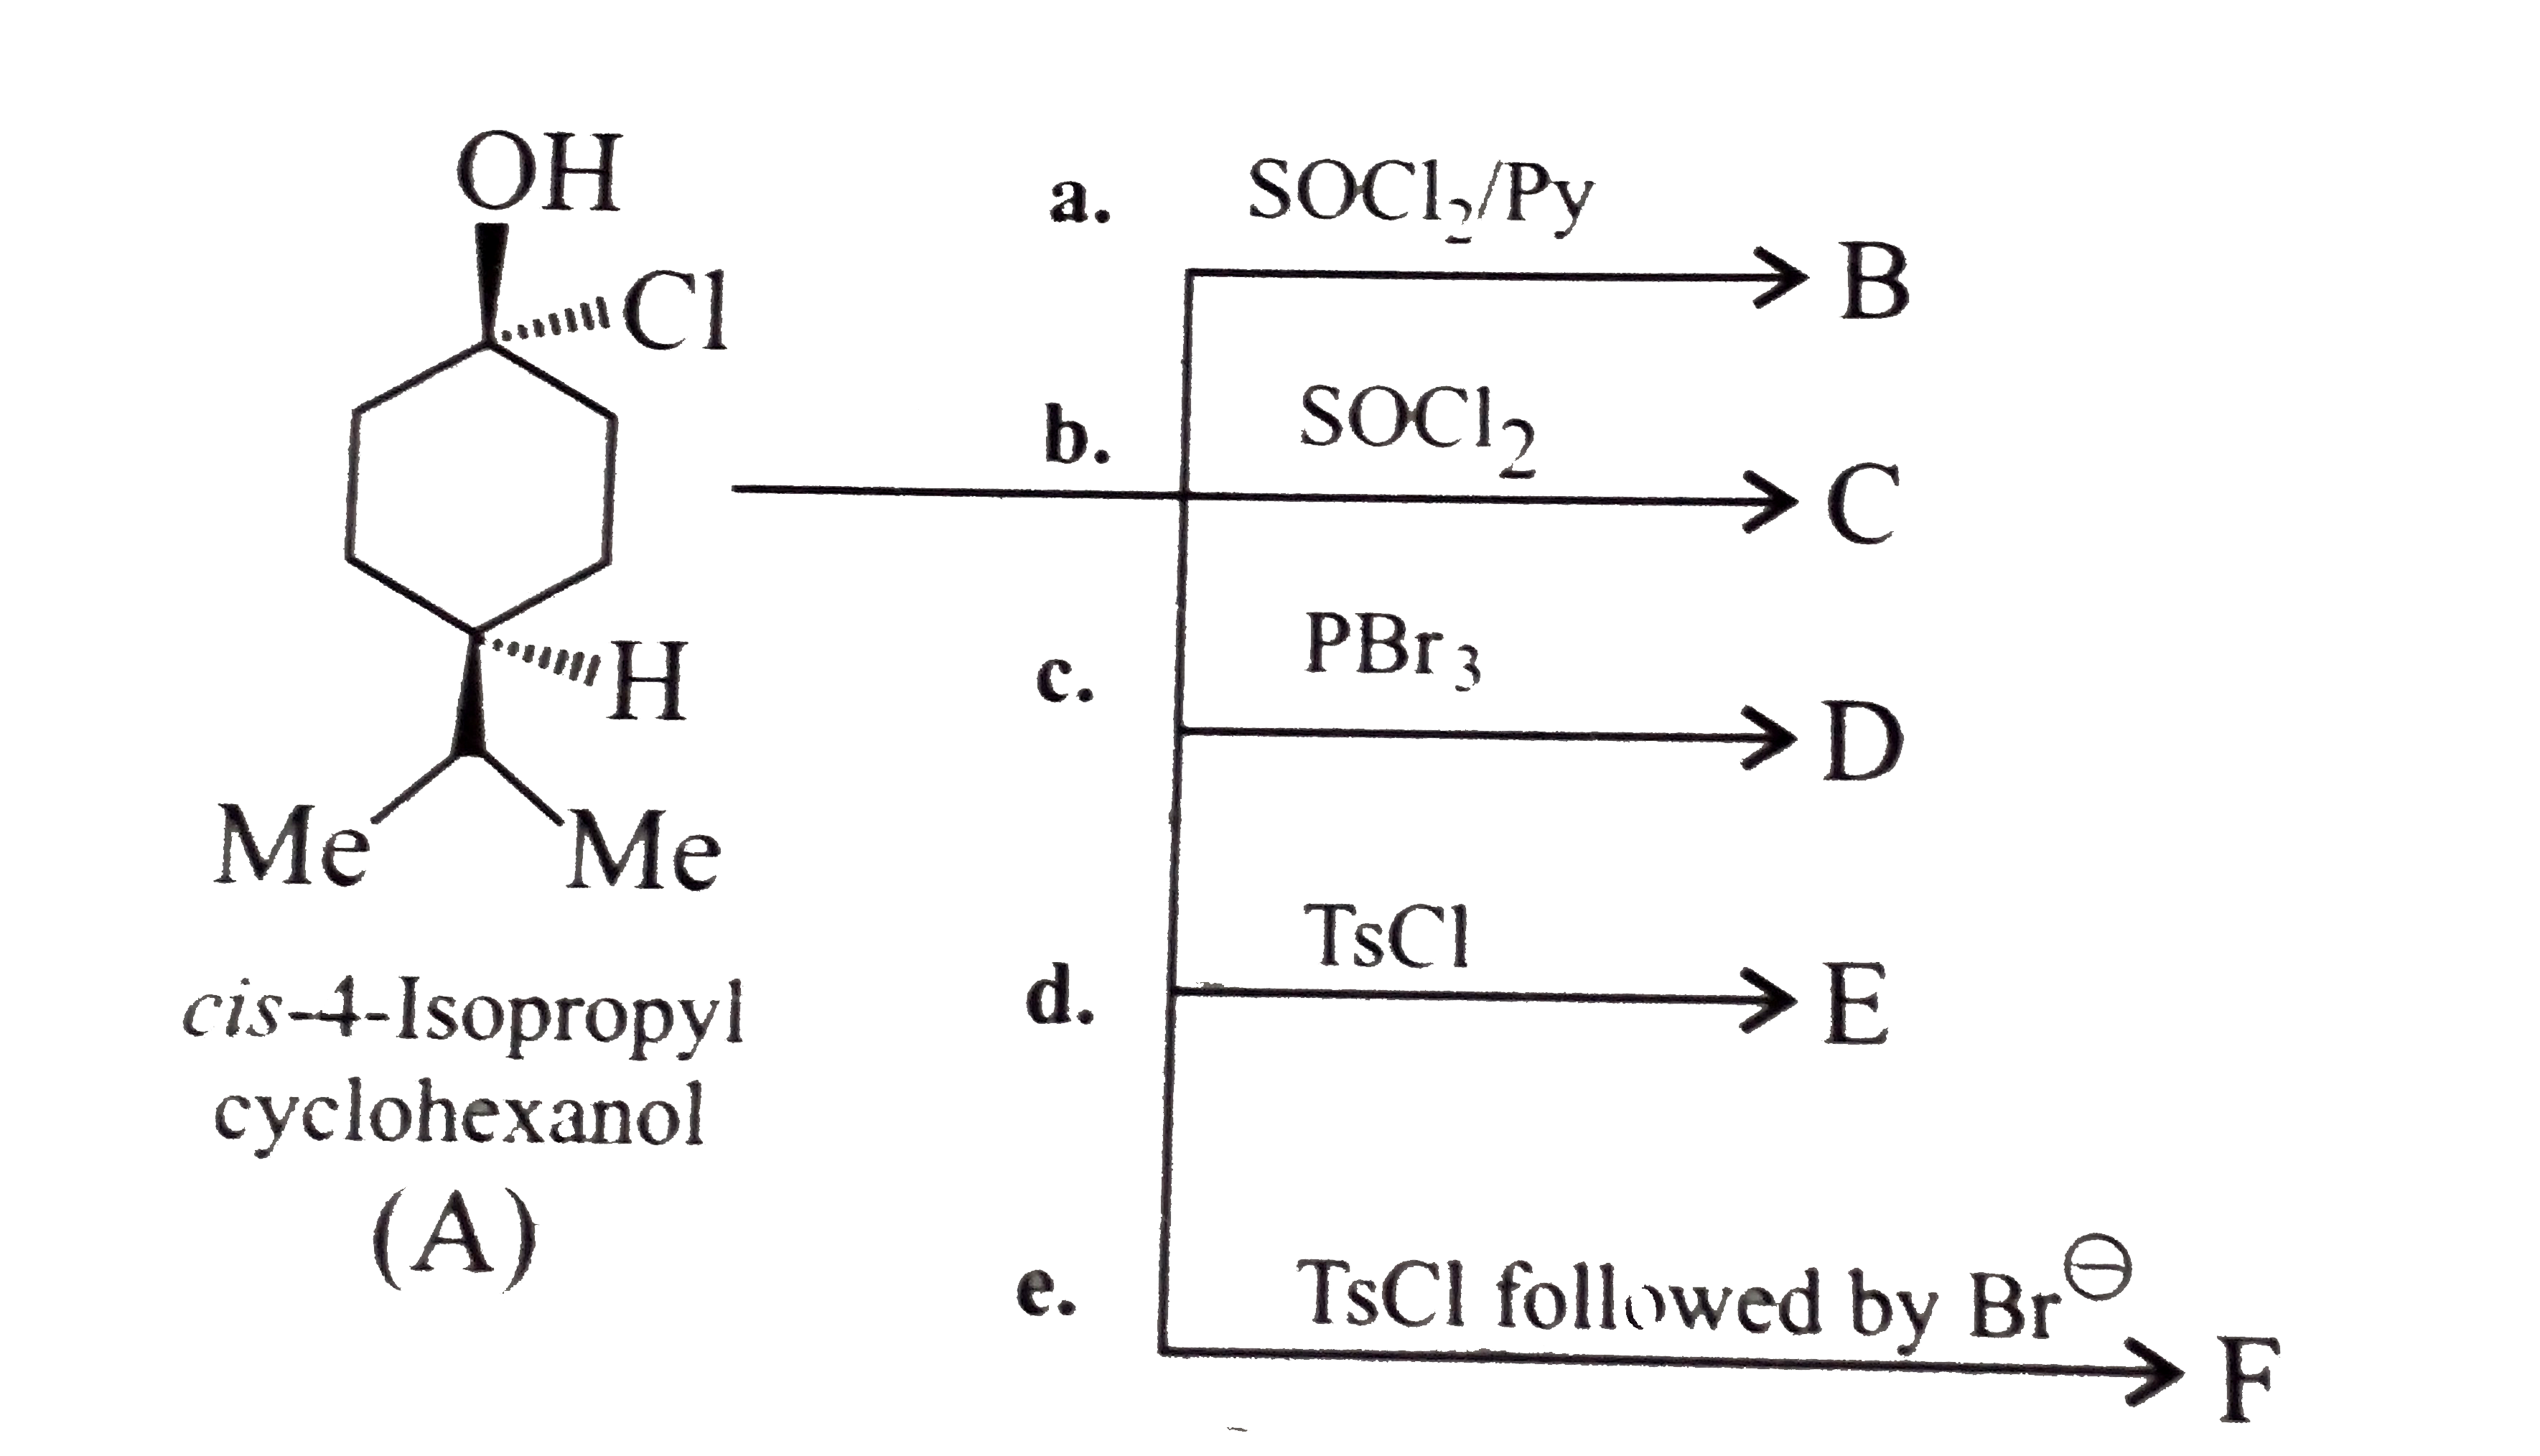 Given the stereochemical product of the following reactions: